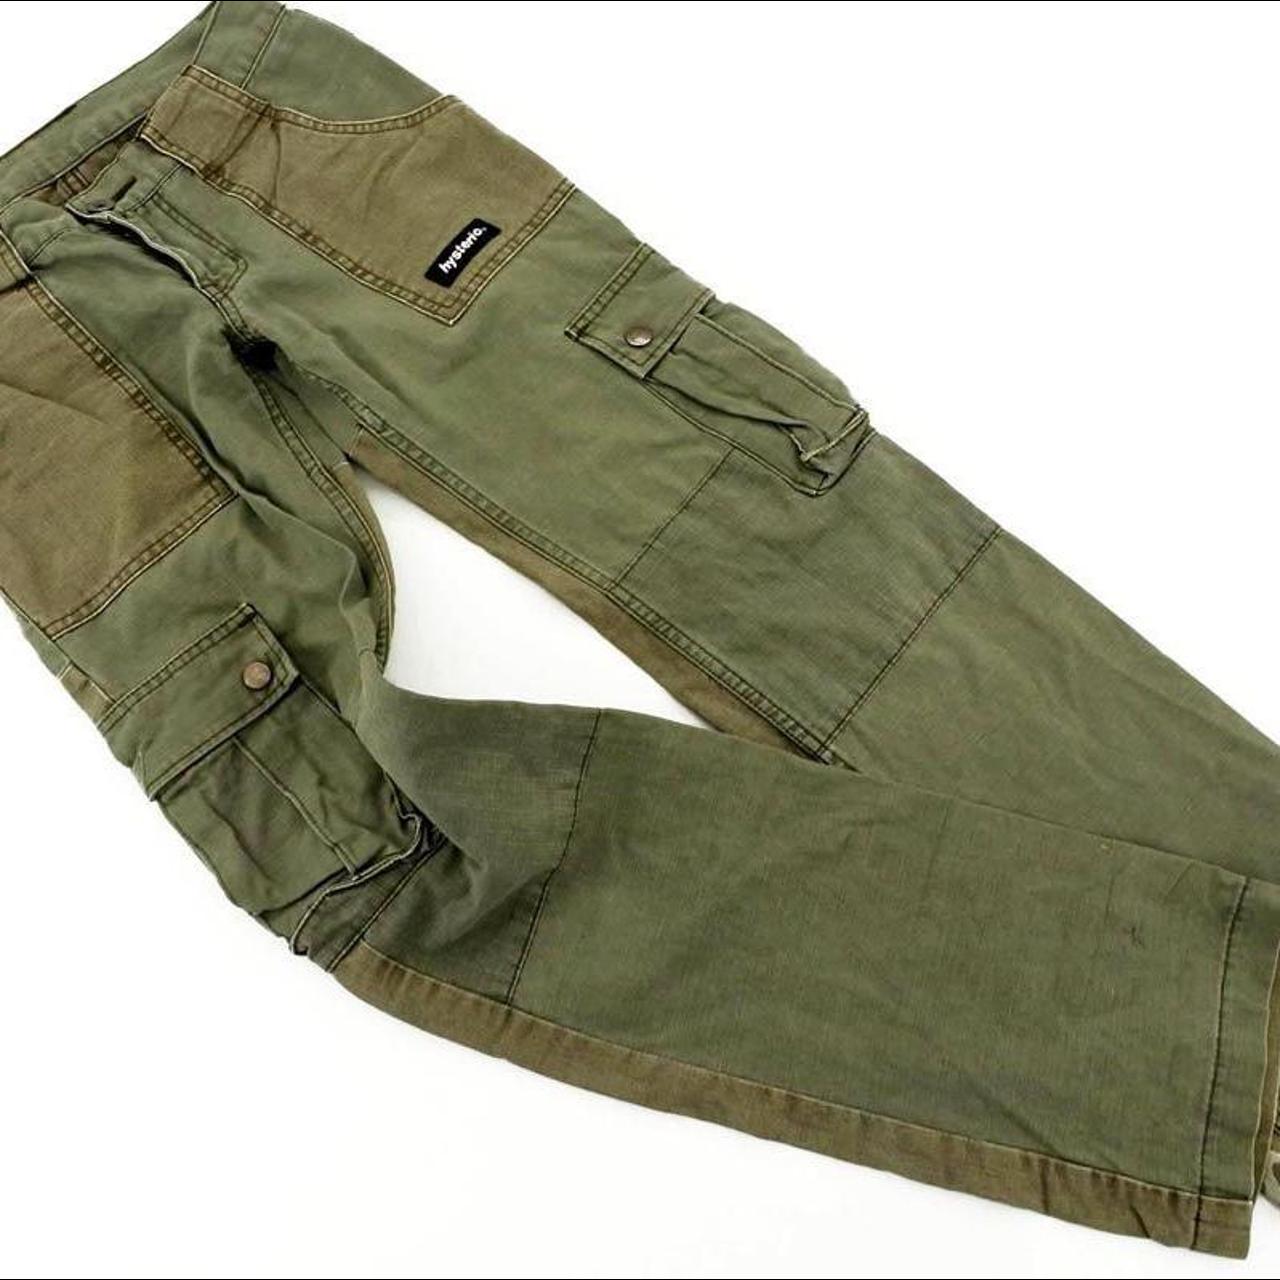 Hysteric Glamour Men's Khaki and Green Jeans